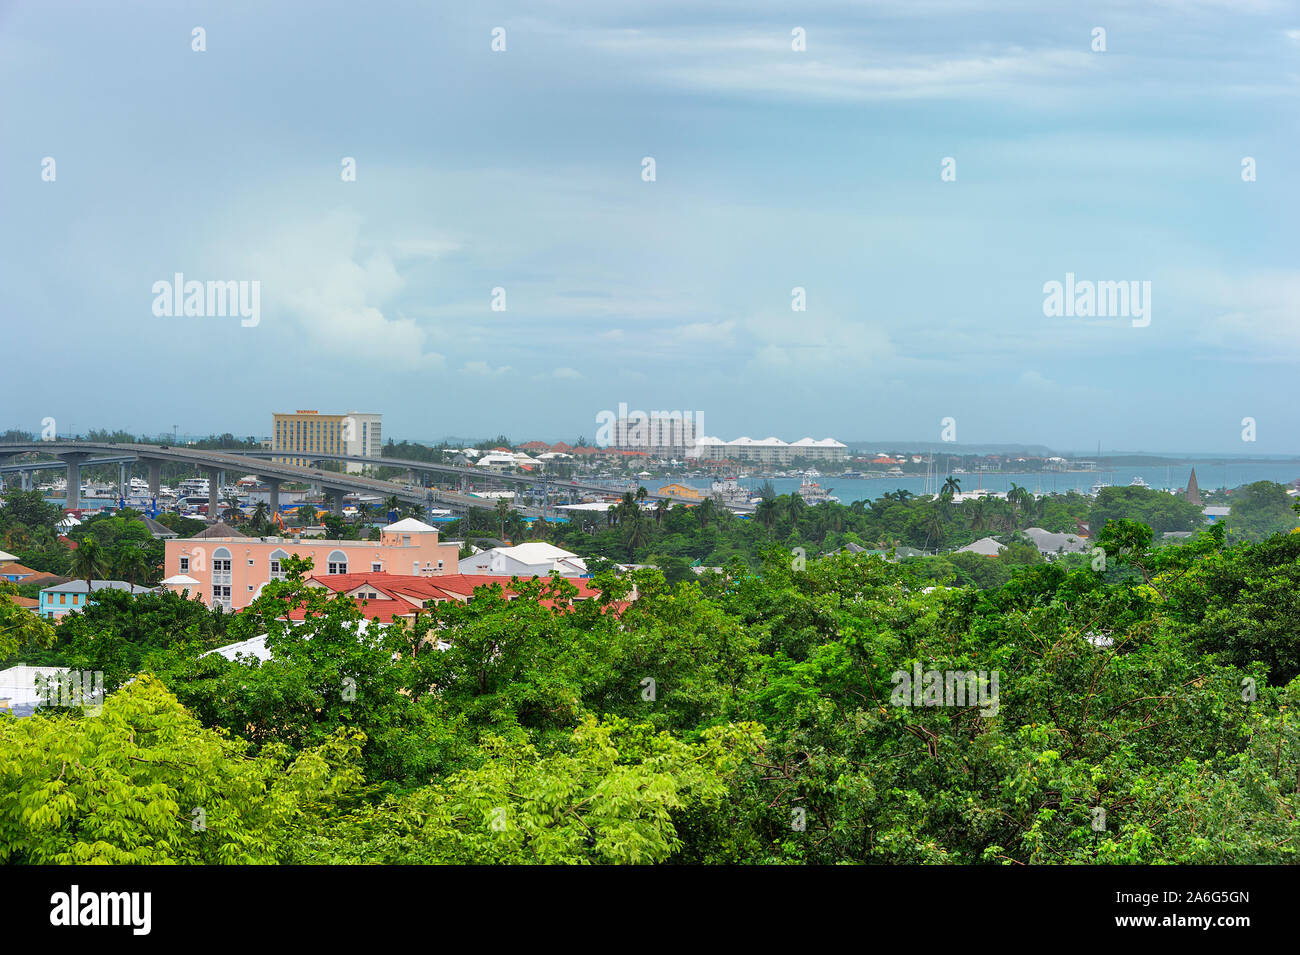 Vast views from on top of Bennetts Hill at Fort Fincastle, includes Paradise Island in the distance under stormy skies.  The rooftop of a yellow build Stock Photo